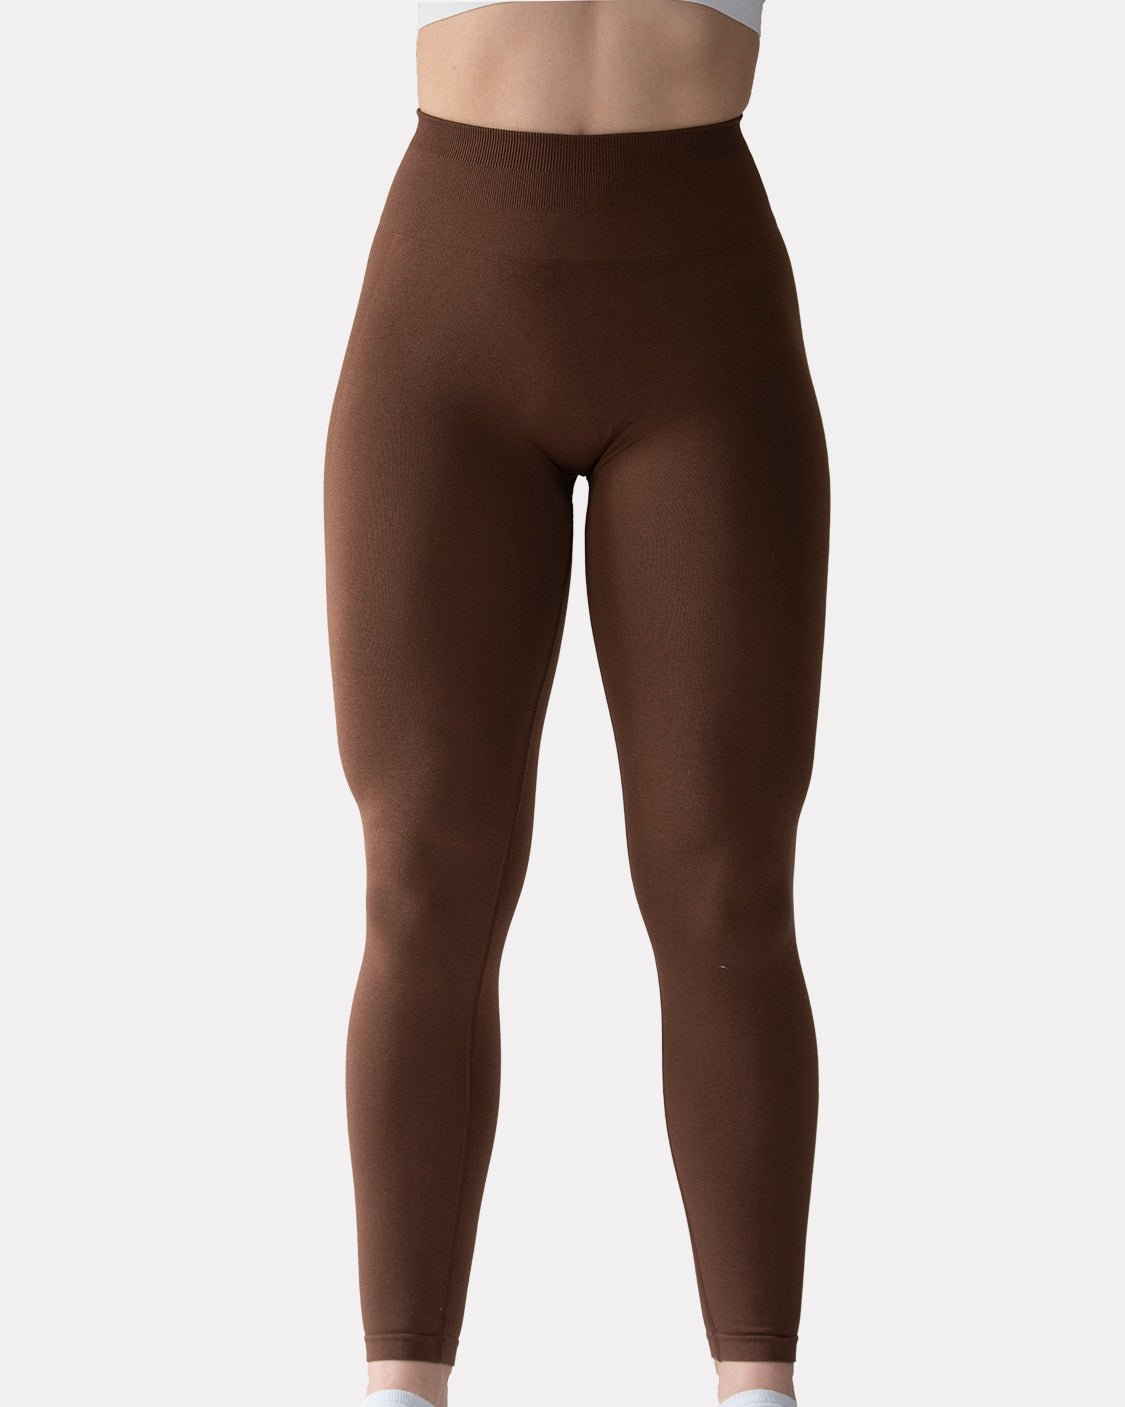 Stand out in every shade and size. Aurora Tights offer size and